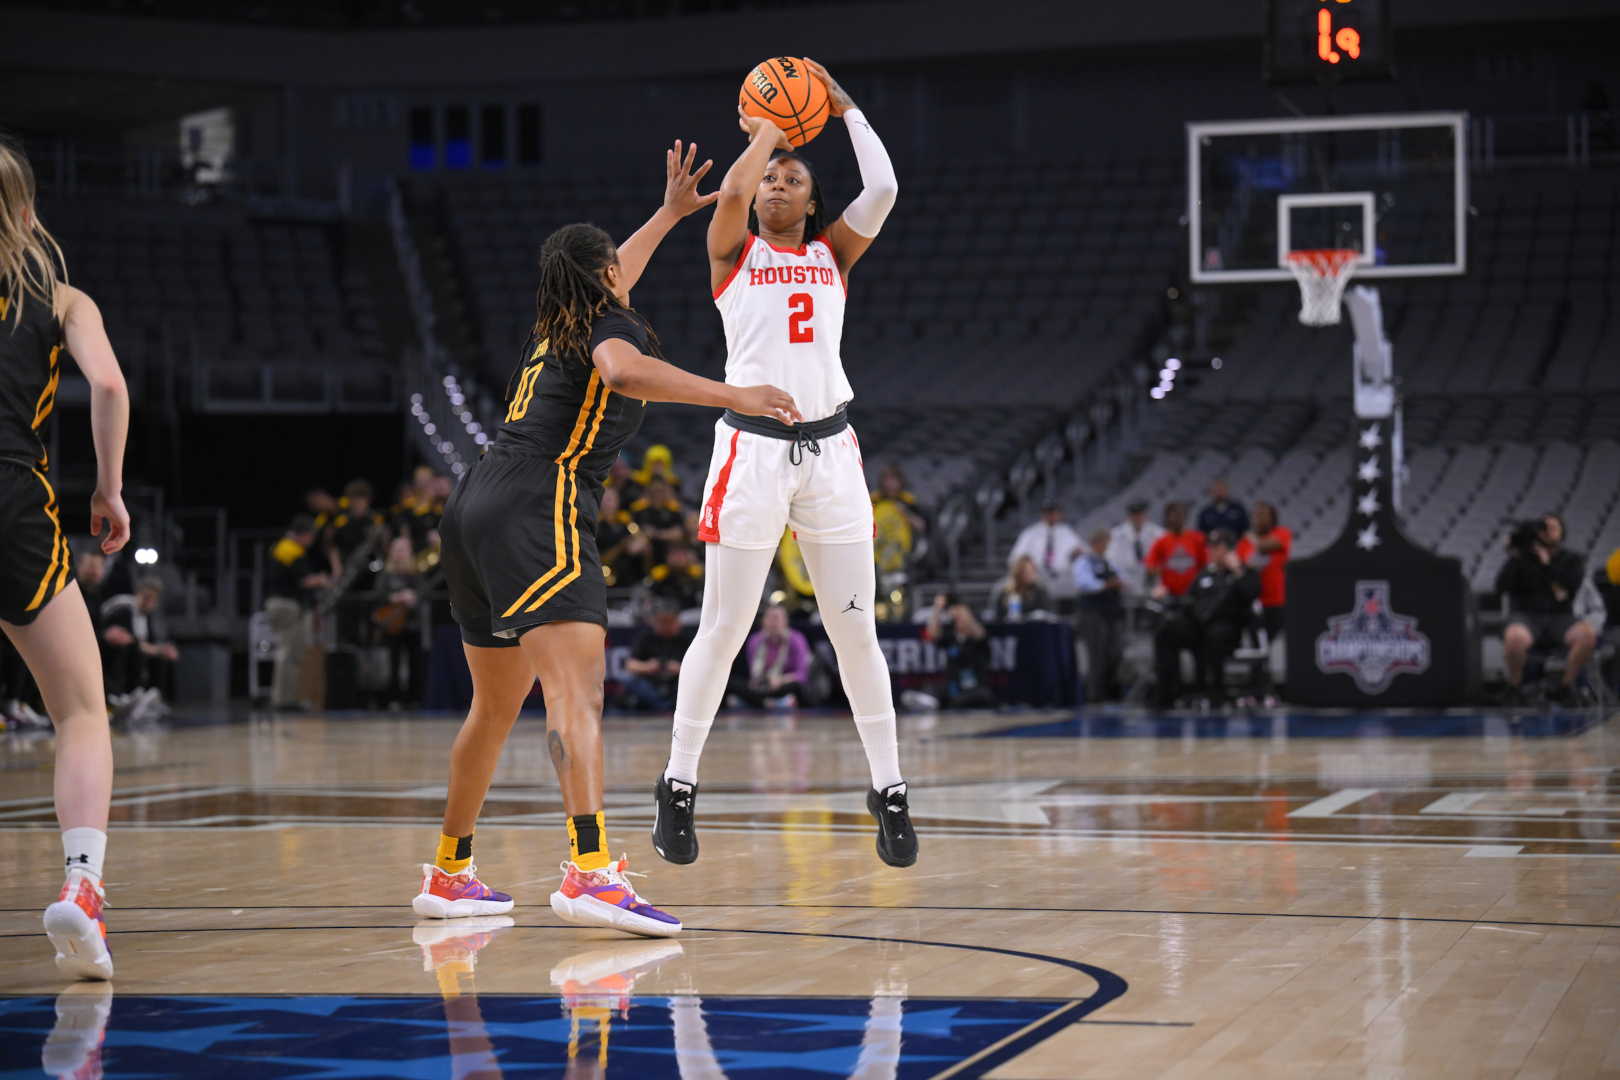 Tiara Young scored career-high 26 points in UH women's basketball's win over Wichita State to advance to the American Athletic Conference Tournament championship game. | Andy Hancock/AAC